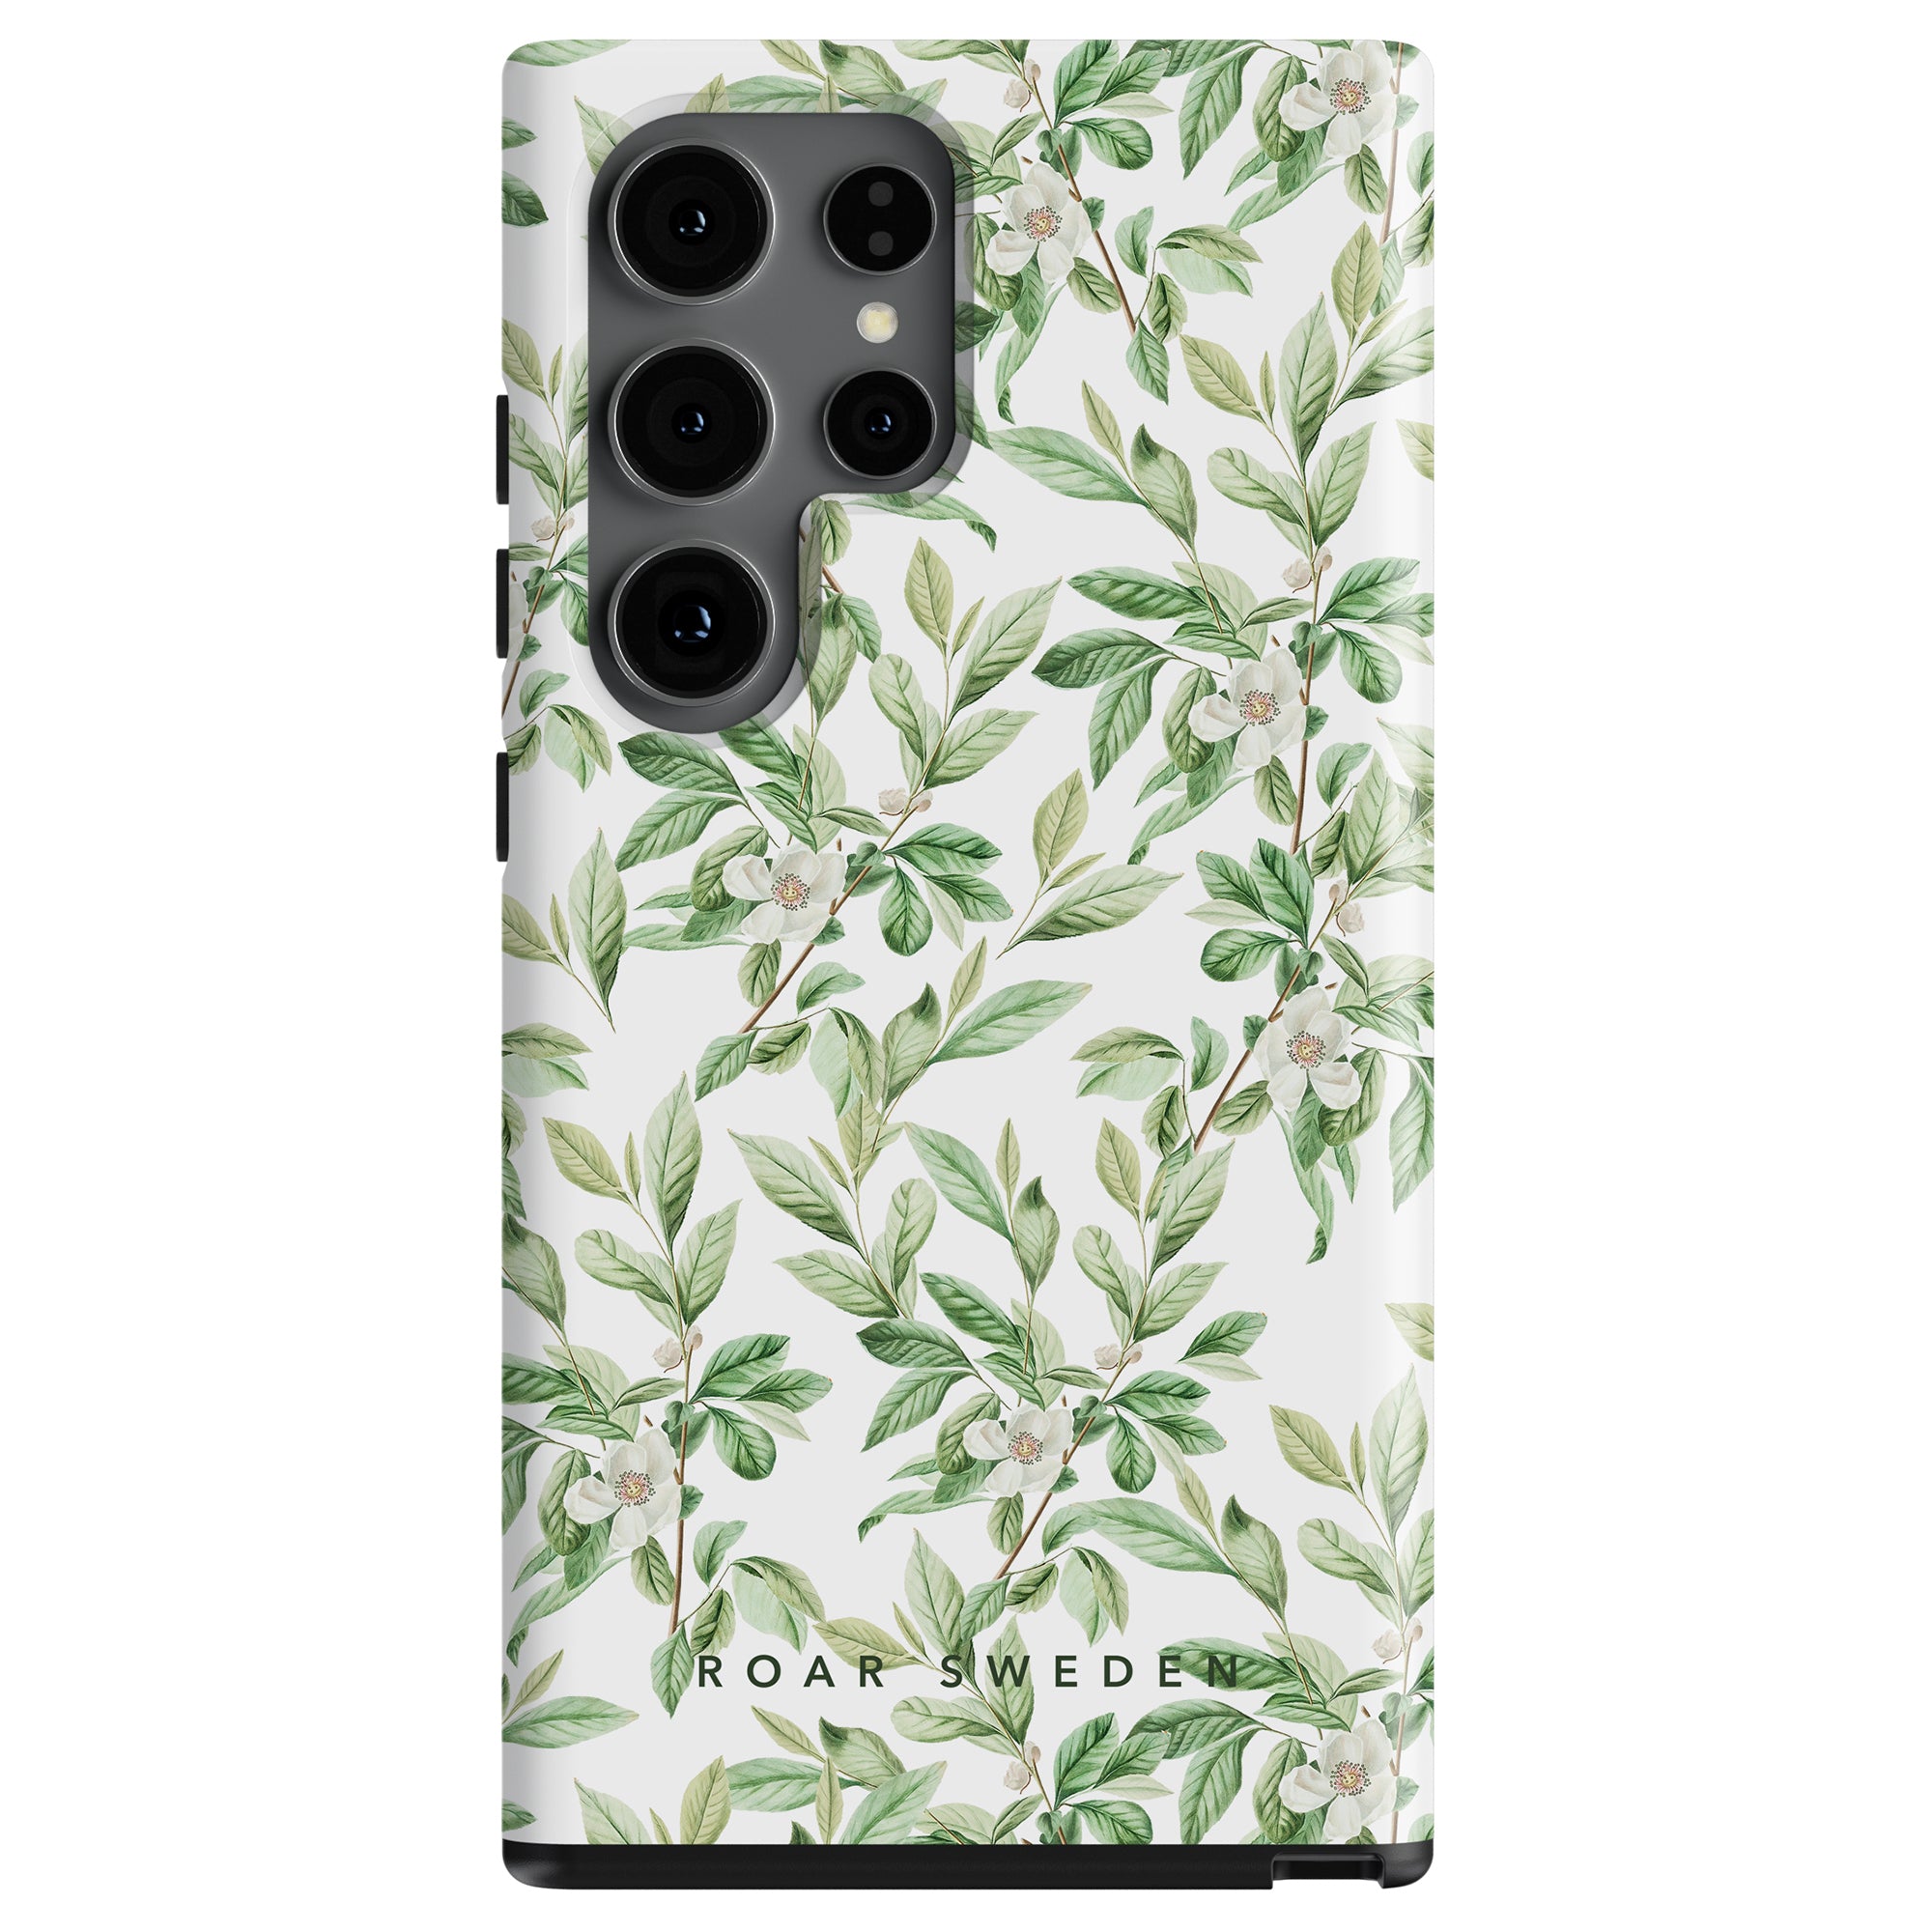 Flagship Smartphone with a Spring Leaves - Tough Case design and triple-camera setup.